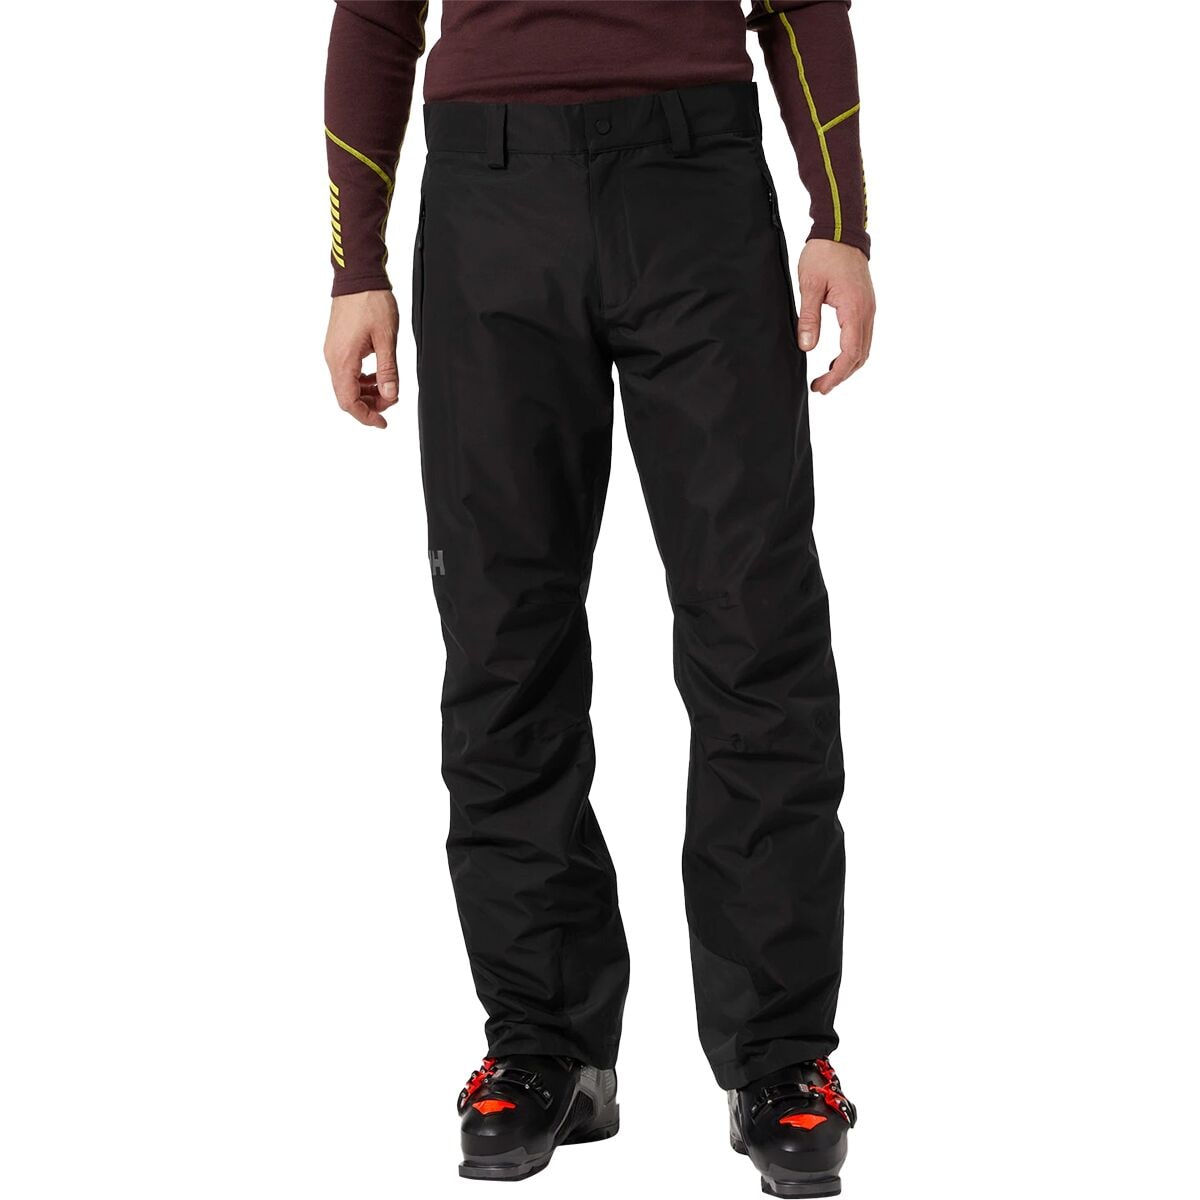 Helly Hansen Blizzard Insulated Pant - Men's - Clothing